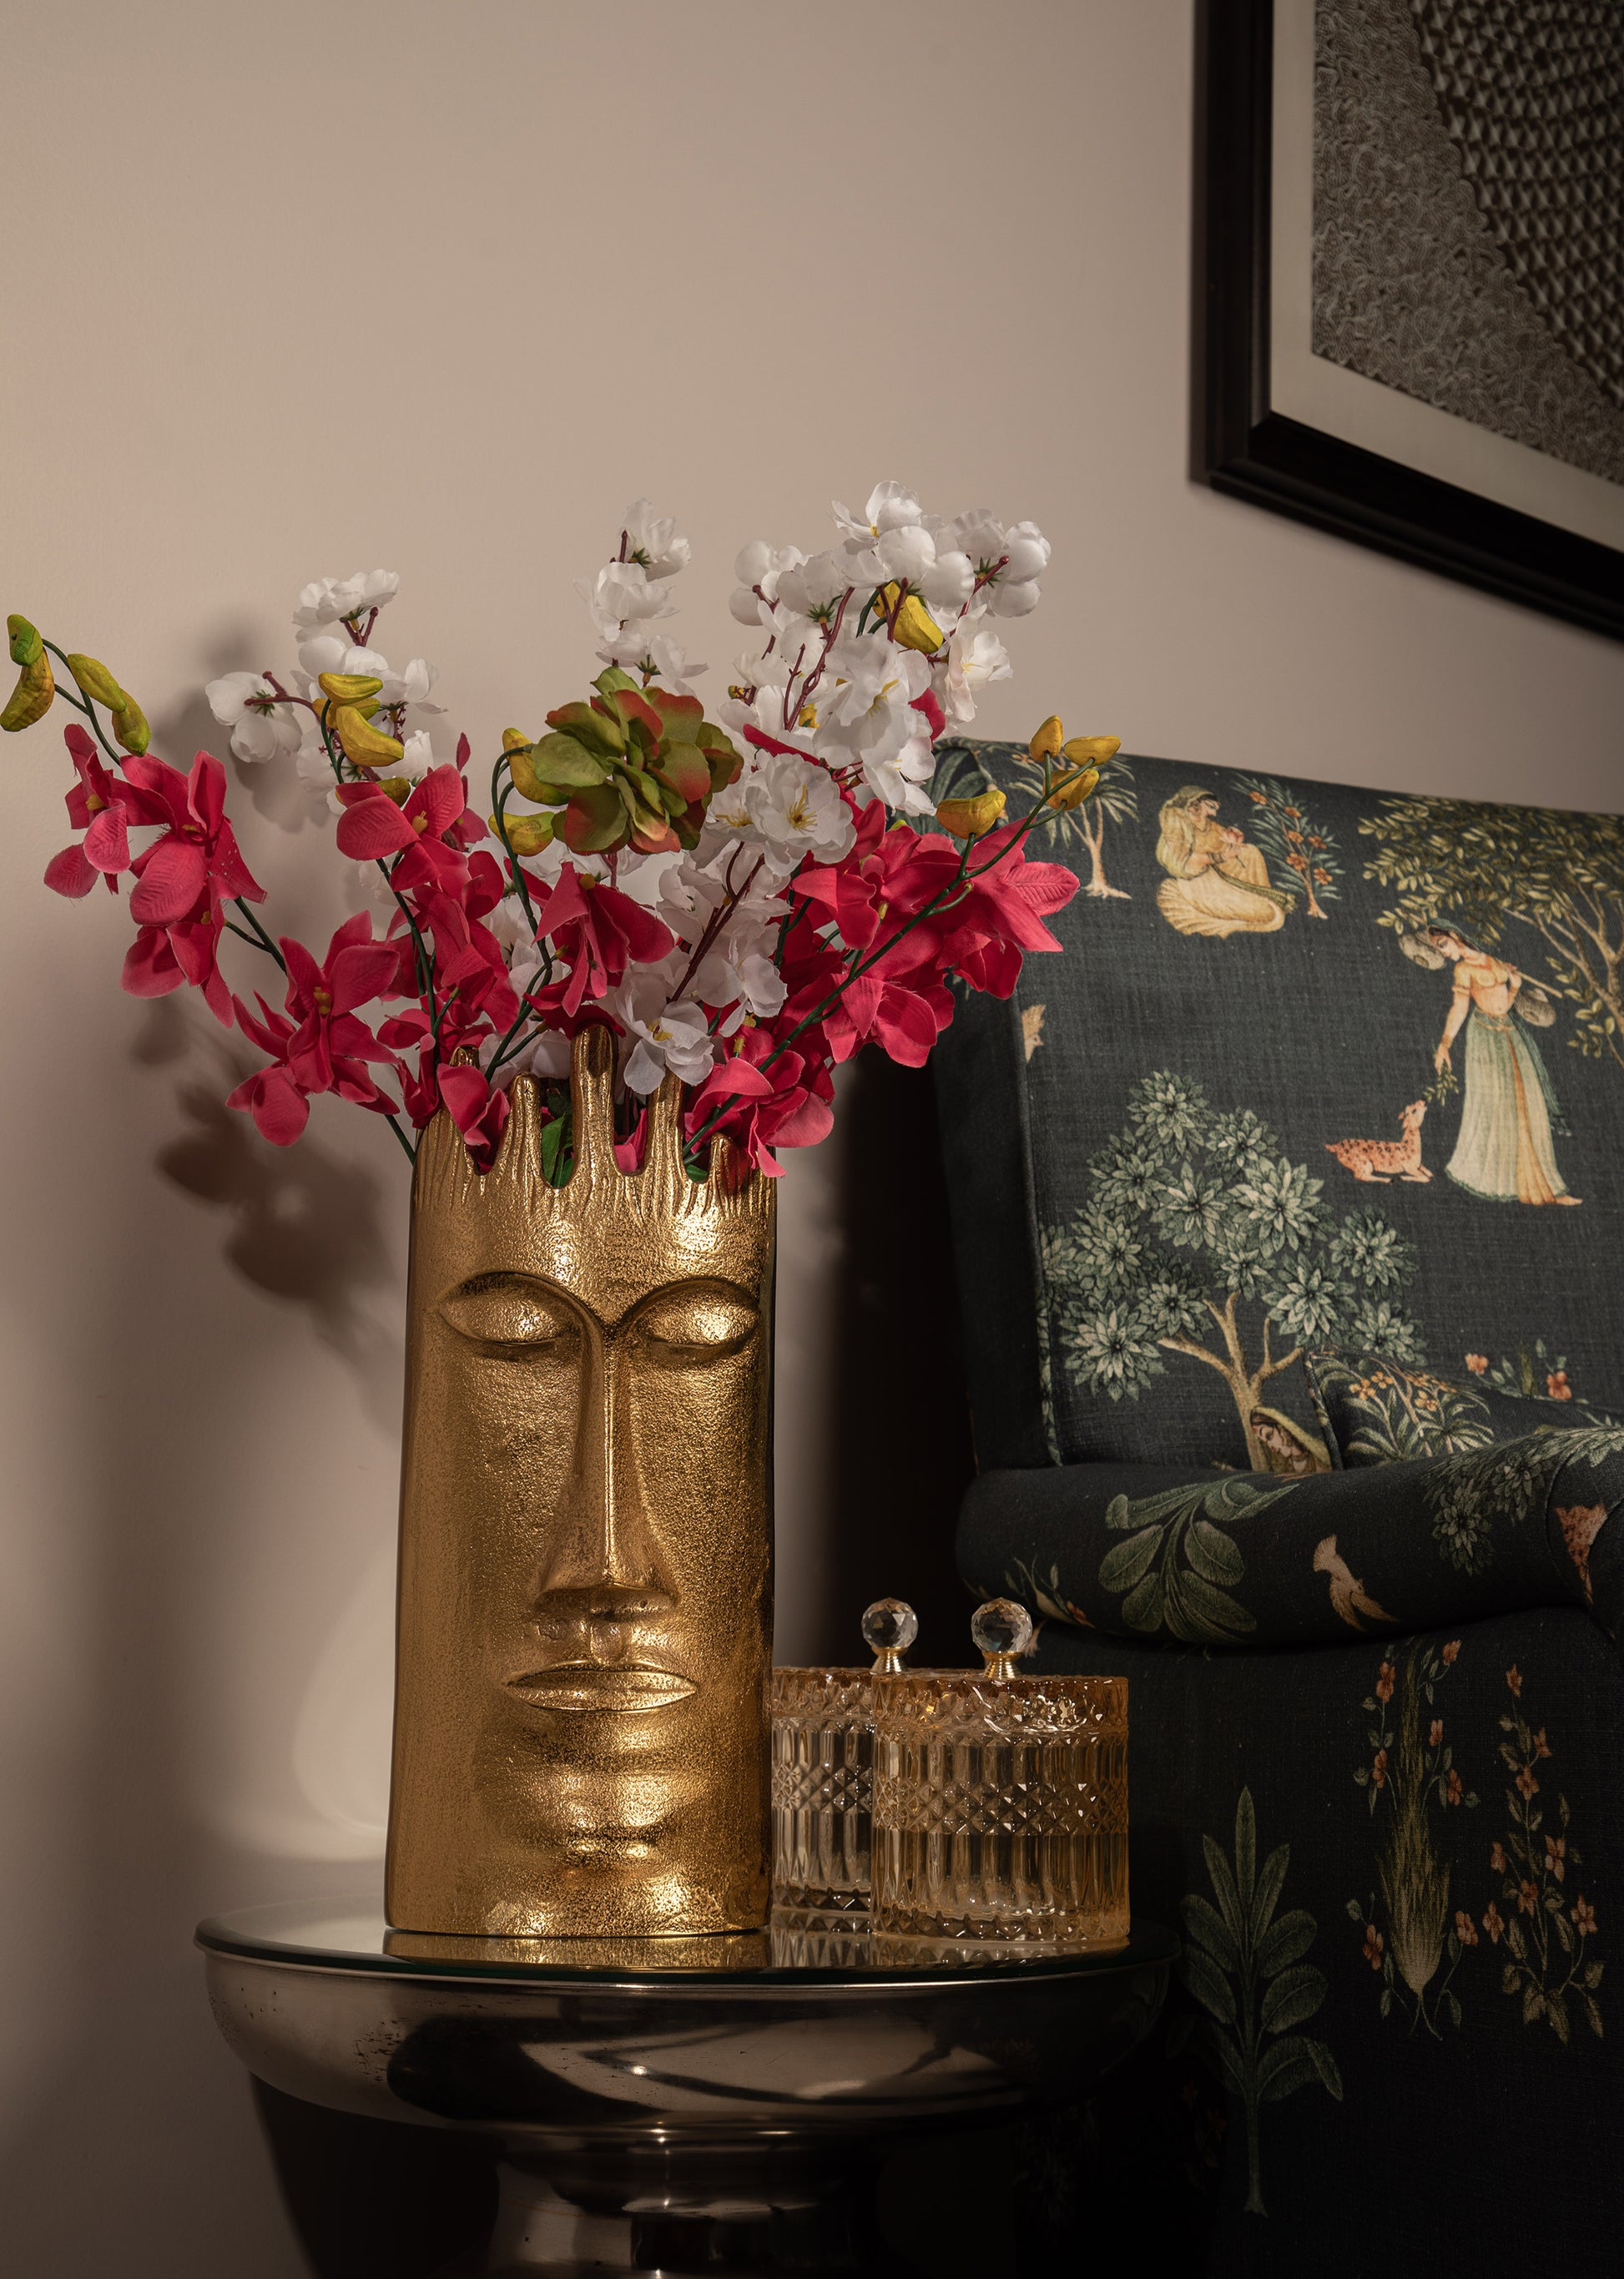 Our Brass Face Vase, a striking and artistic addition to your home decor.